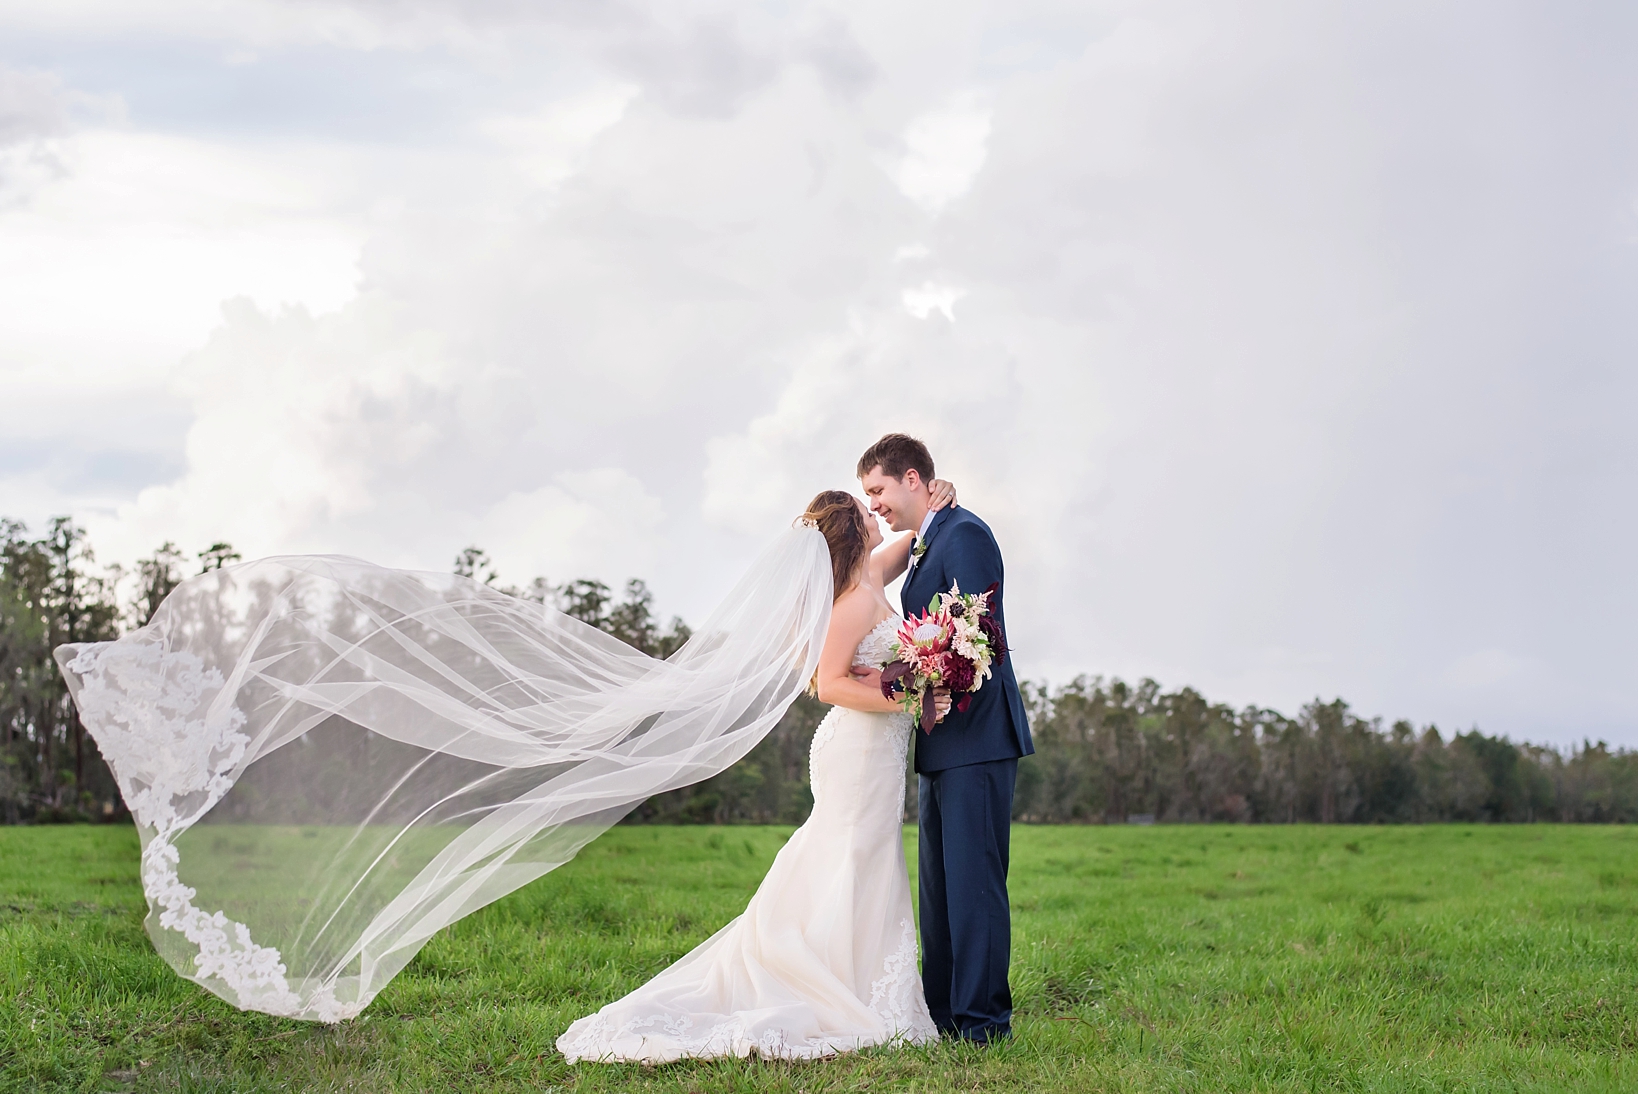 Bride and her groom embrace as the wind blows her cathedral veil